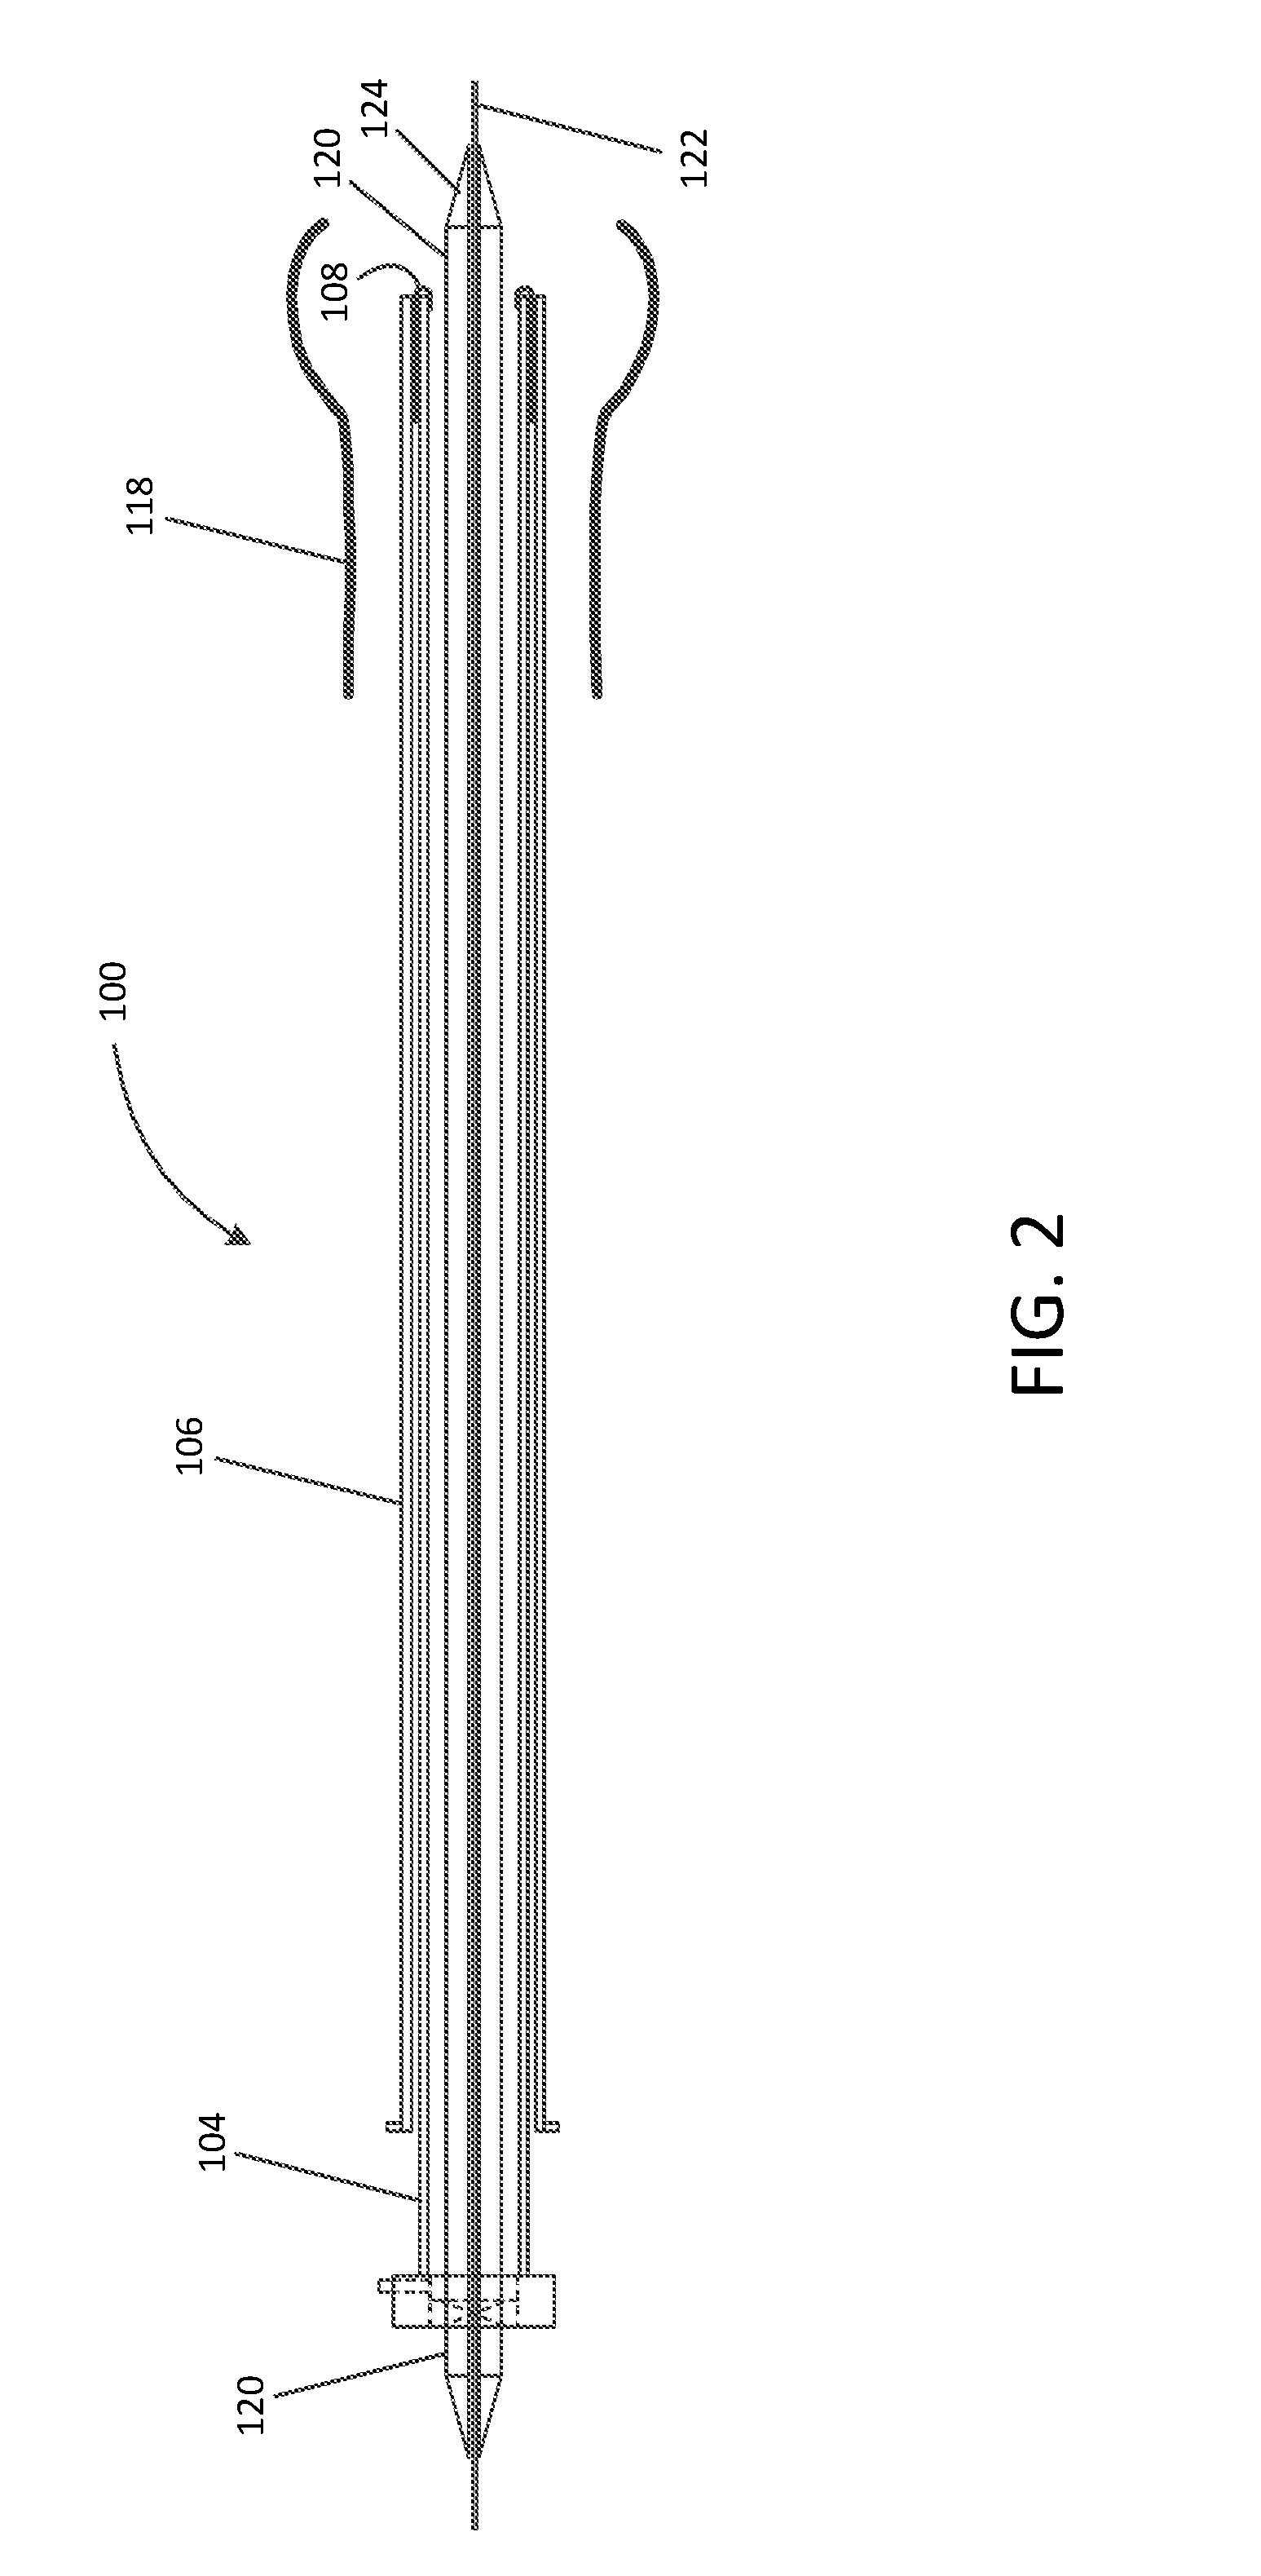 Valve replacement devices and methods